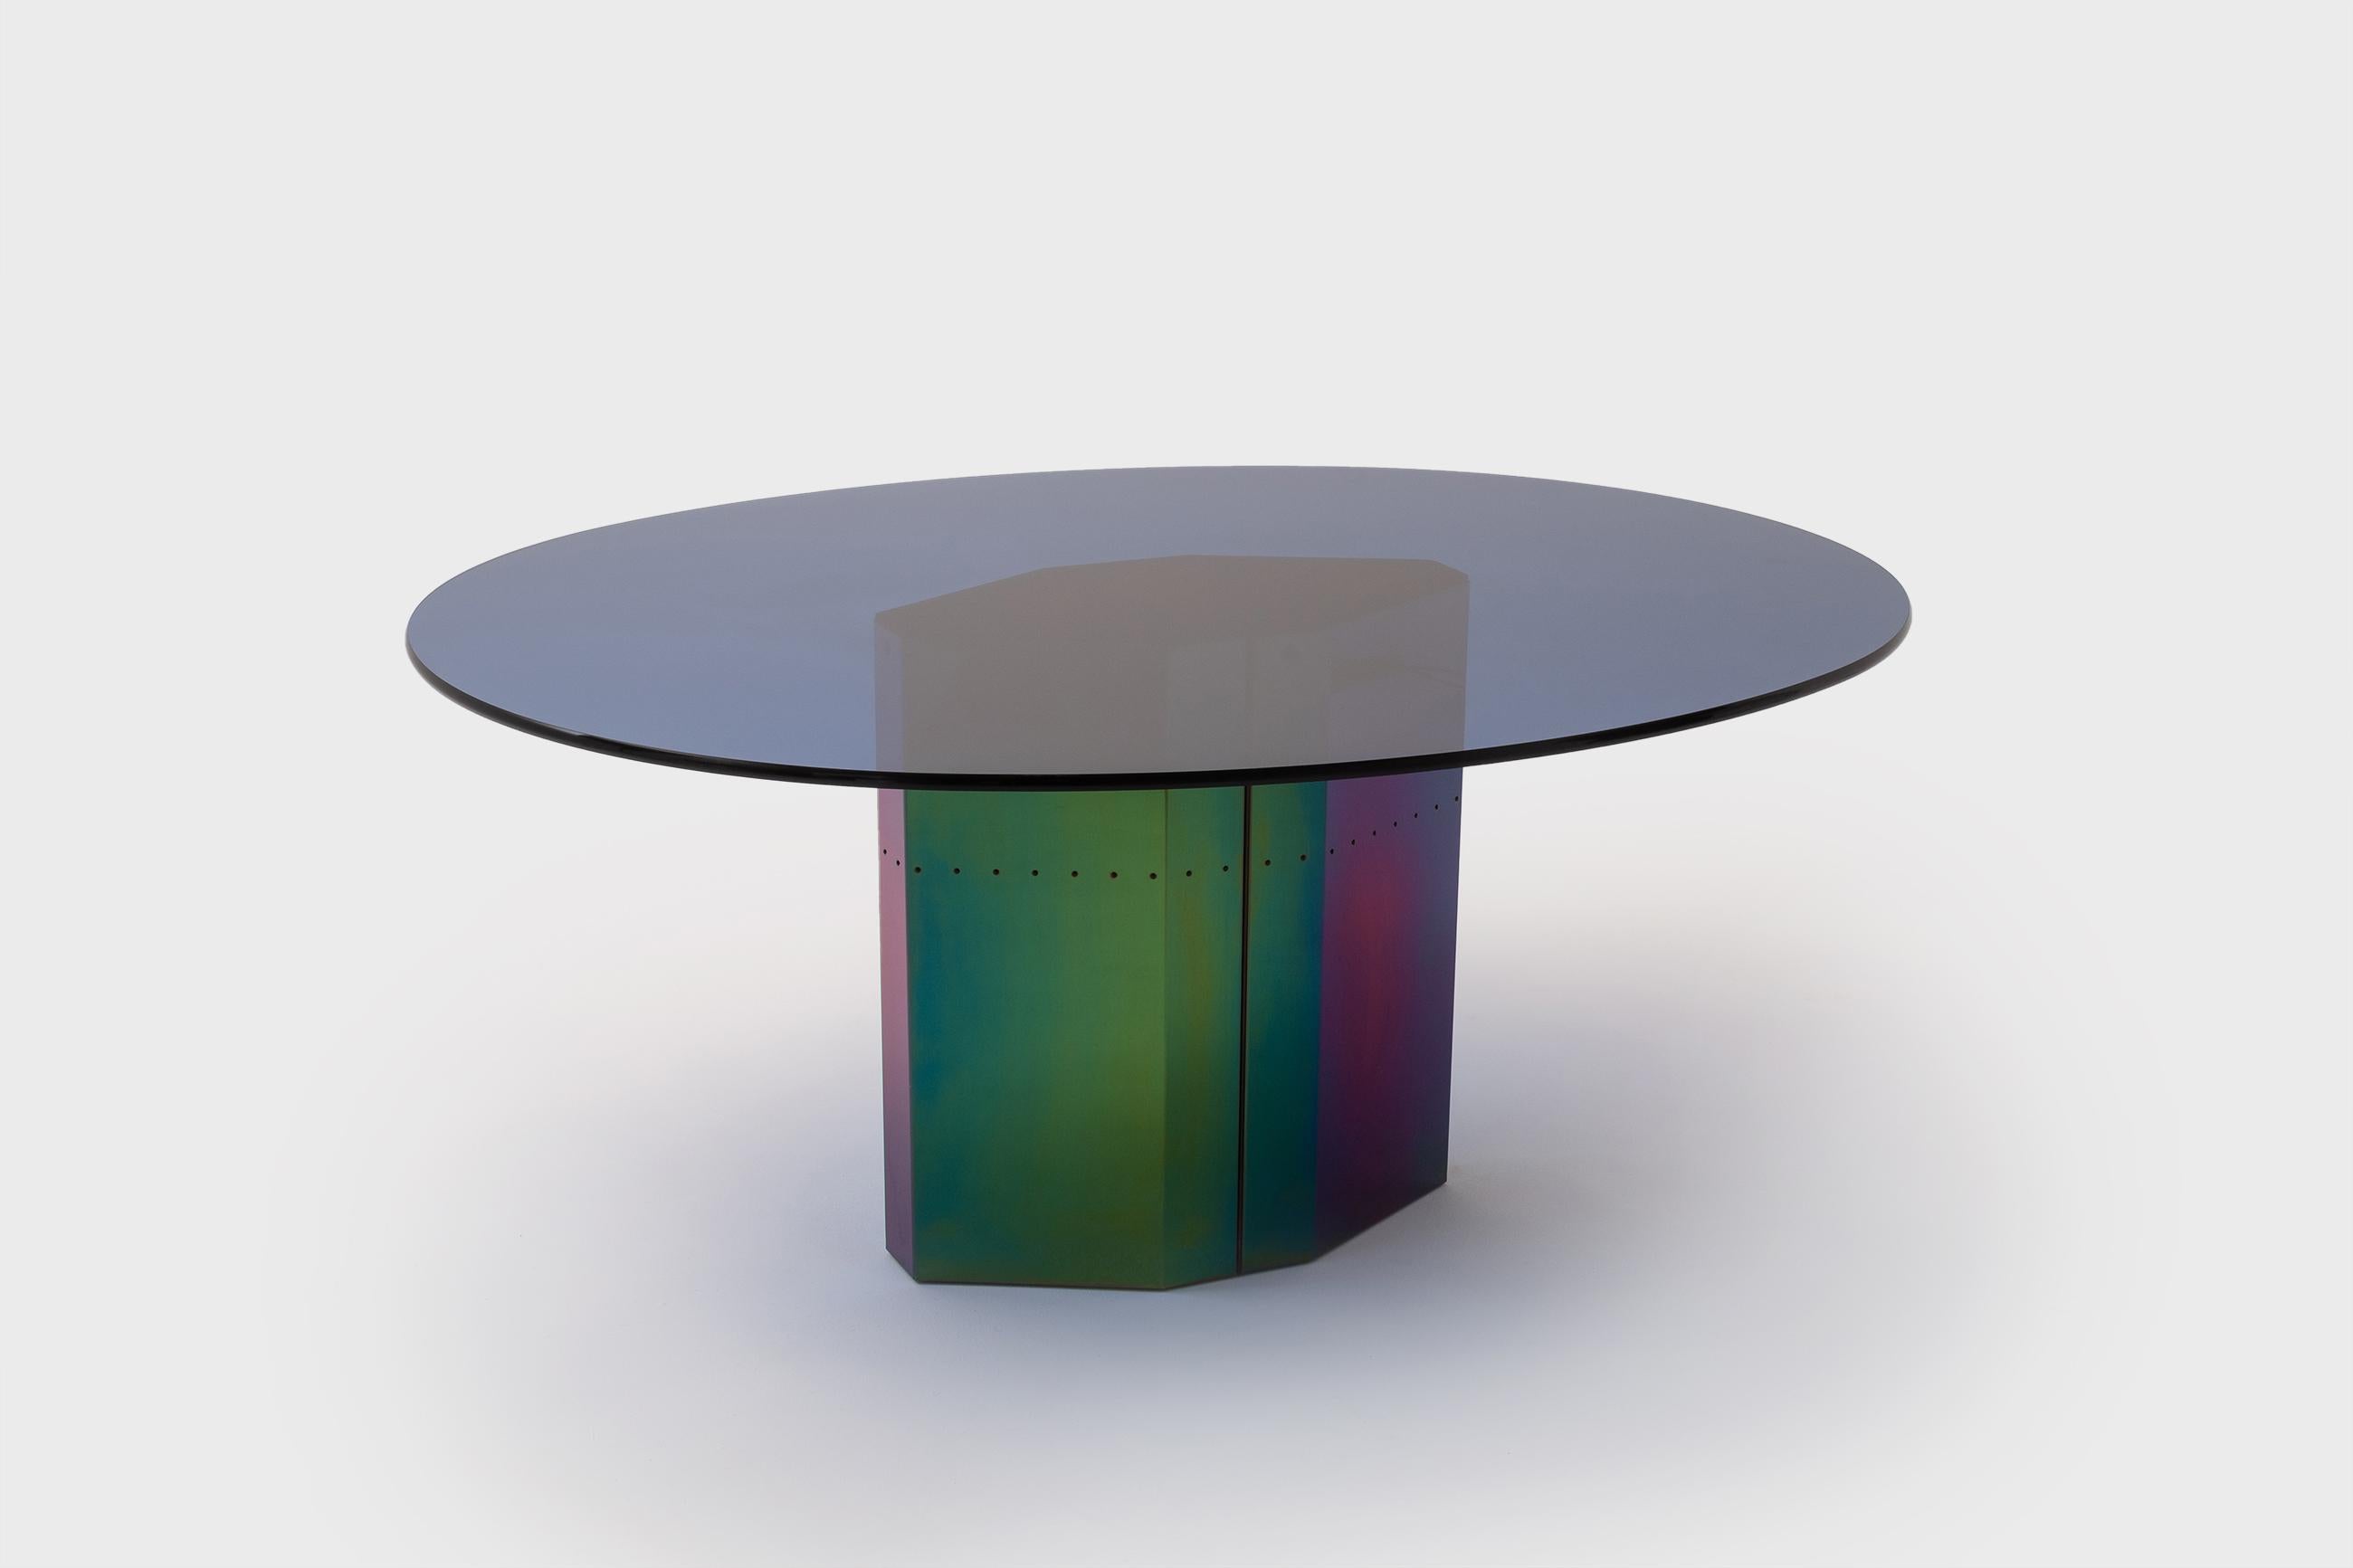 Rare and exceptional dining table mod. ‘Polygonon’ by Afra & Tobia Scarpa for B&B Italia, Italy 1984. The fantastic base is made from electro coated stainless sheets with an iridescent finish which shifts into different colors; from blue to green to